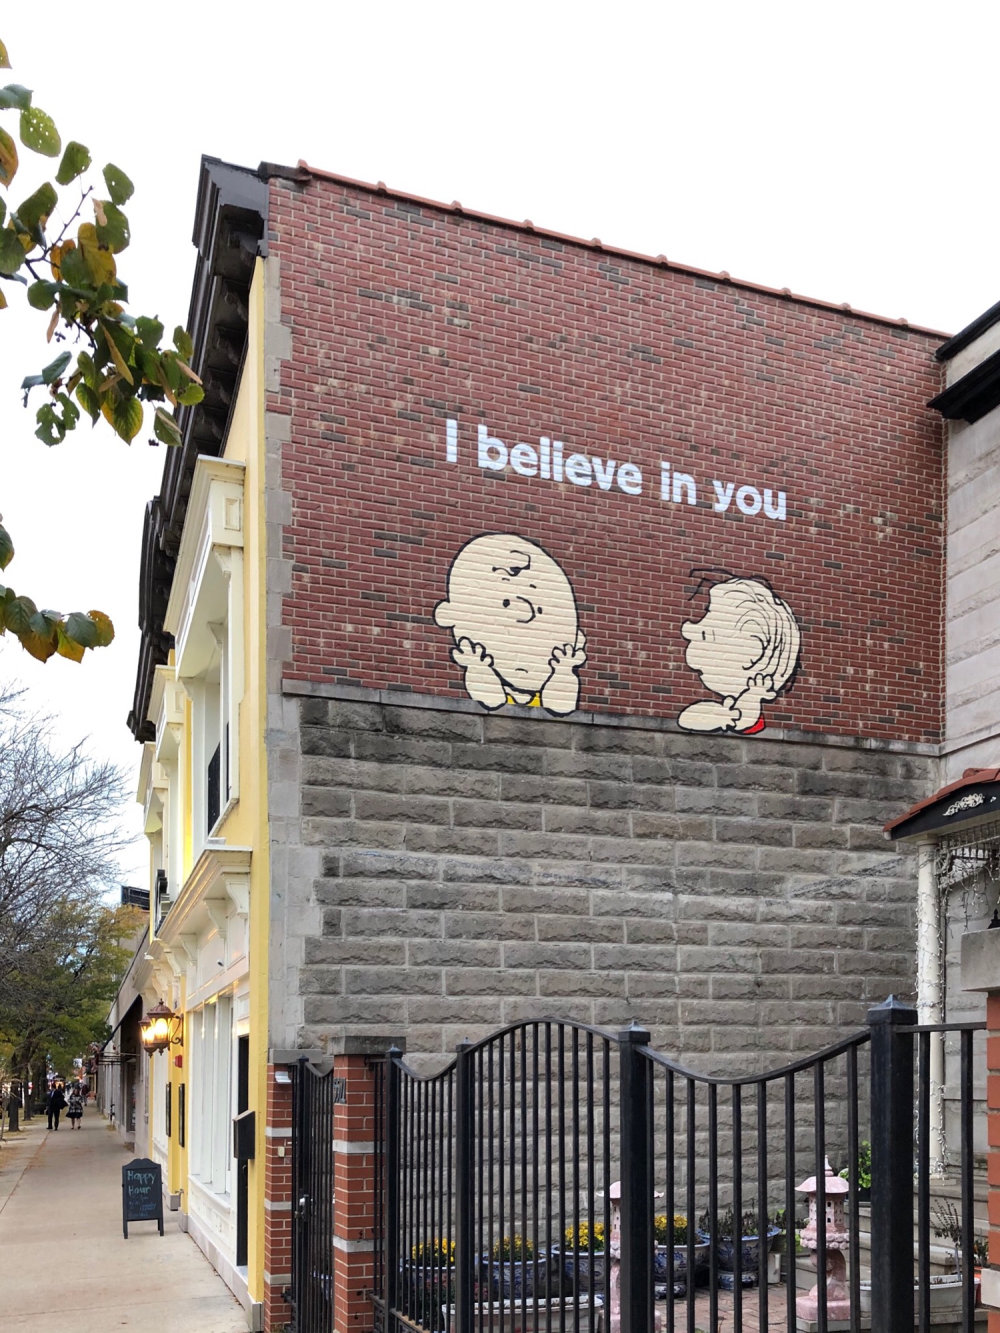 mural in Chicago by artist unknown. Tagged: Charlie Brown